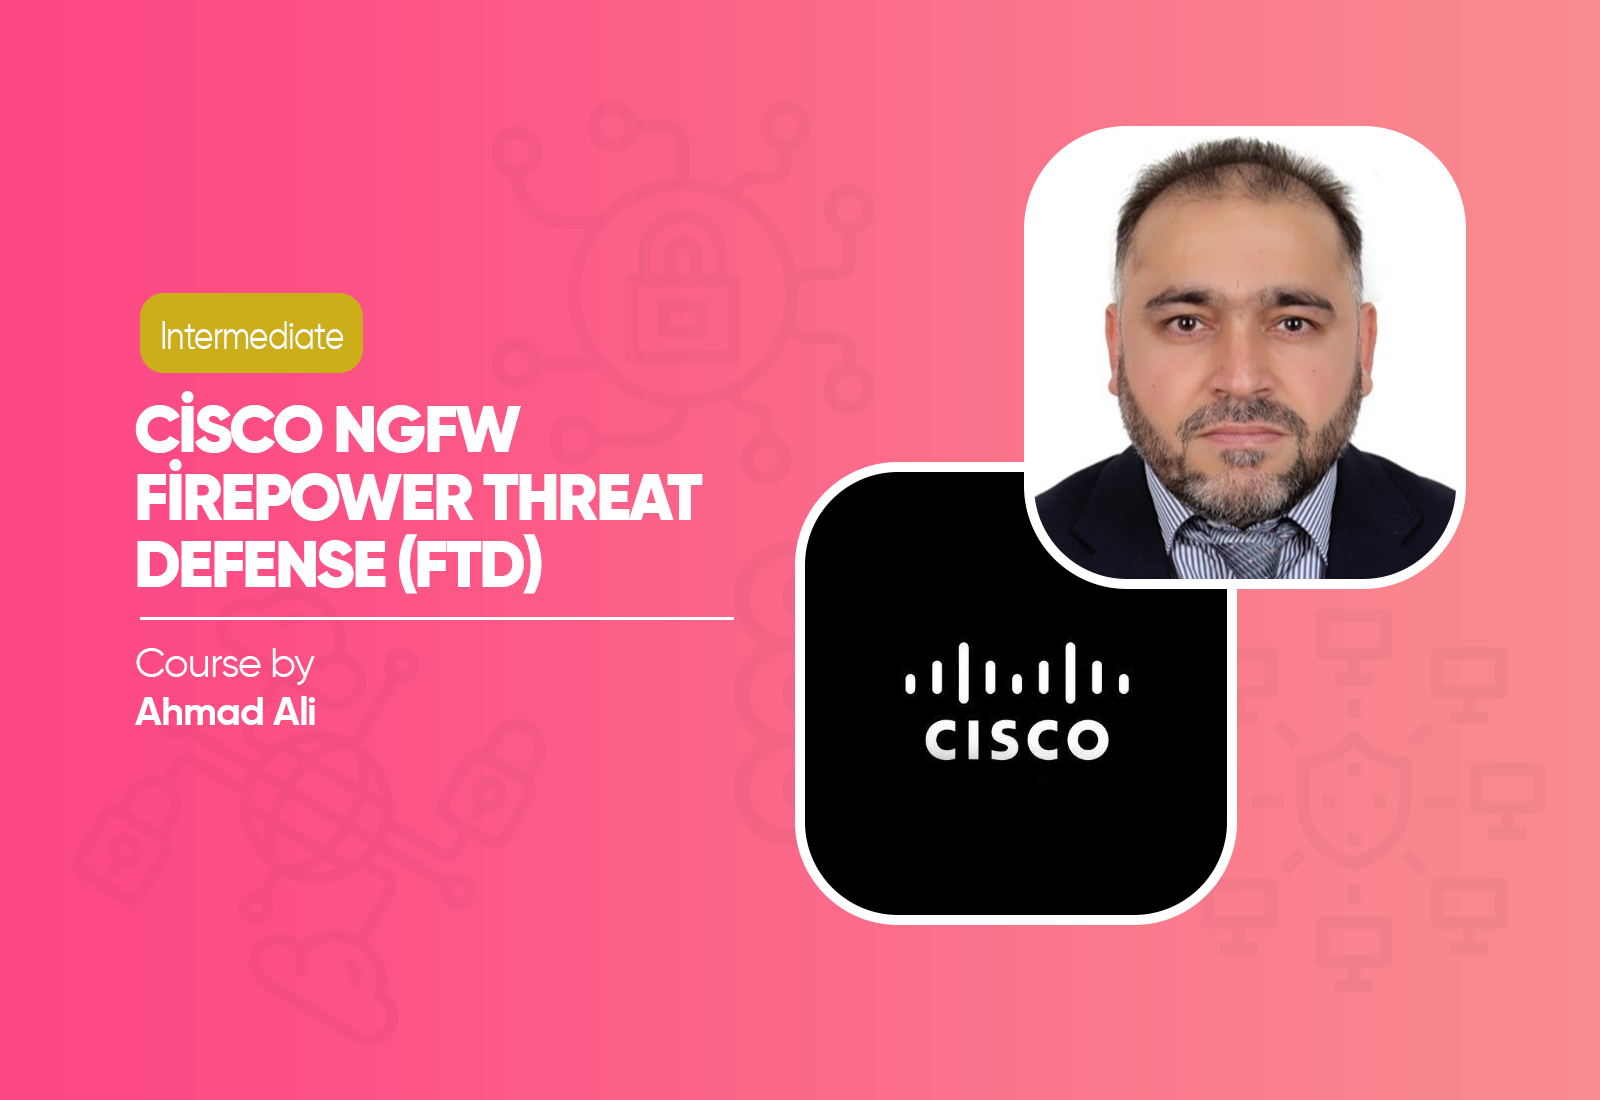 Cisco NGFW Firepower Threat Defense (FTD) Course